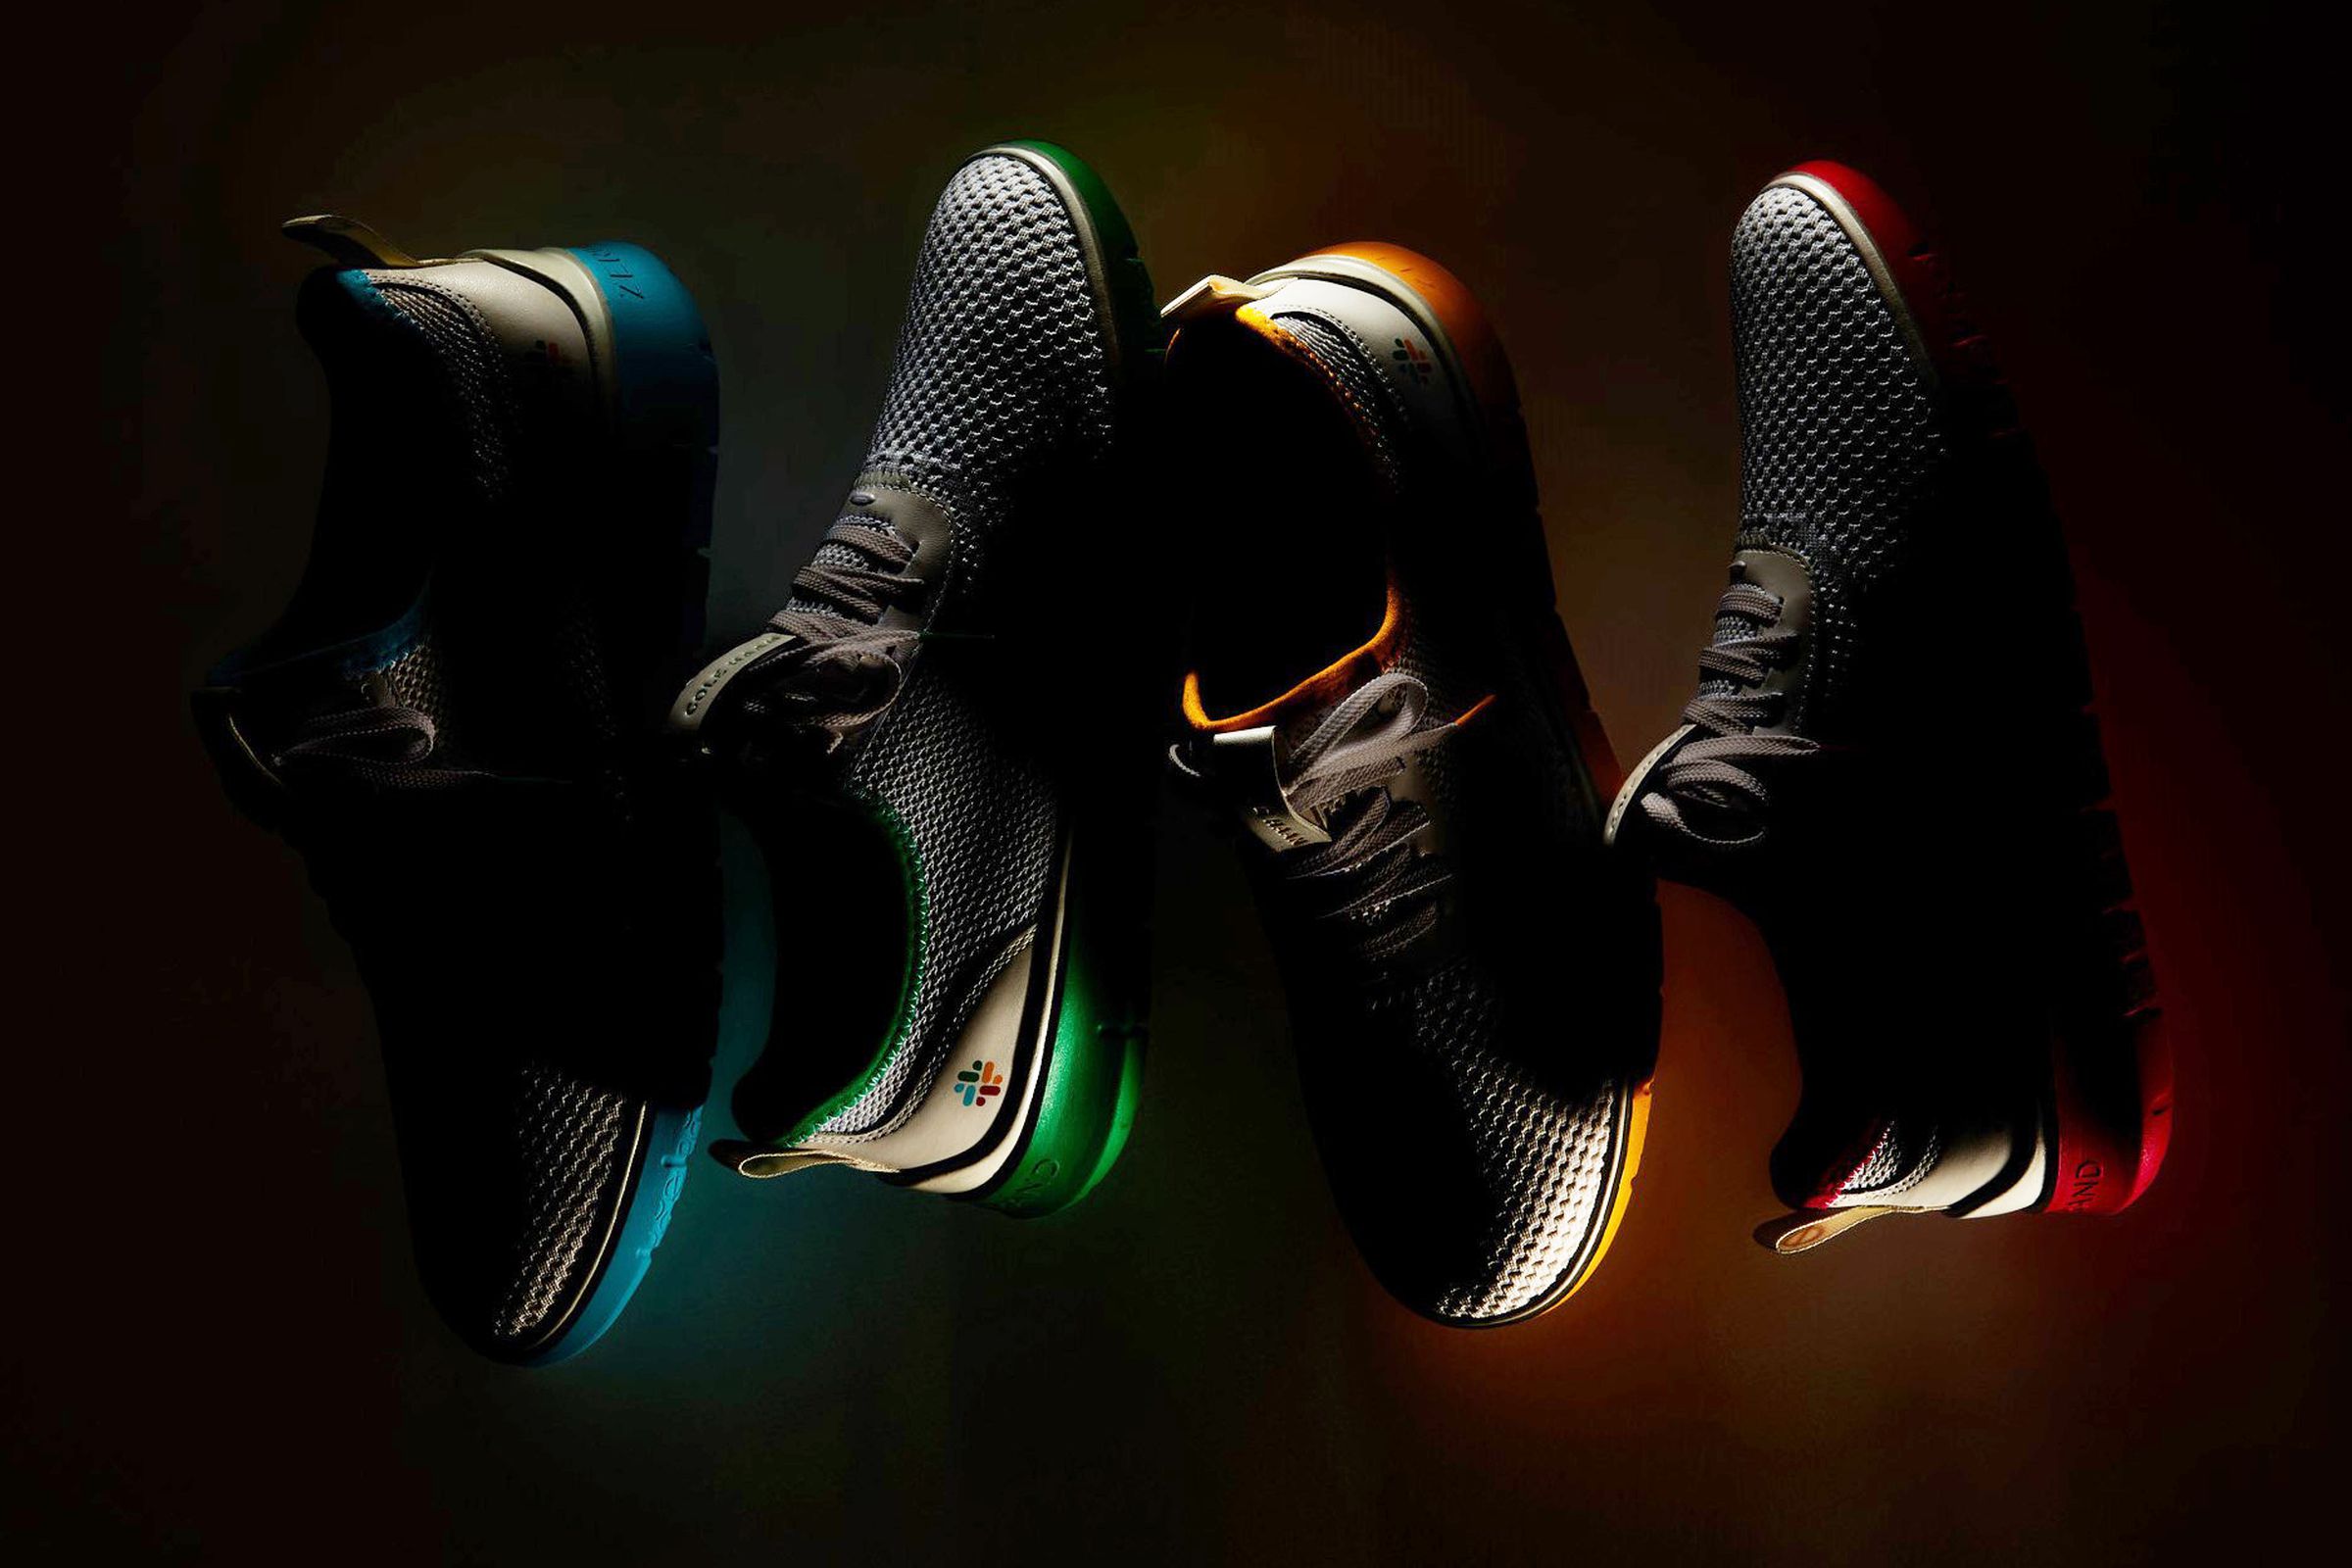 A teaser image (which we’ve brightened) shows the upcoming sneaker designs.